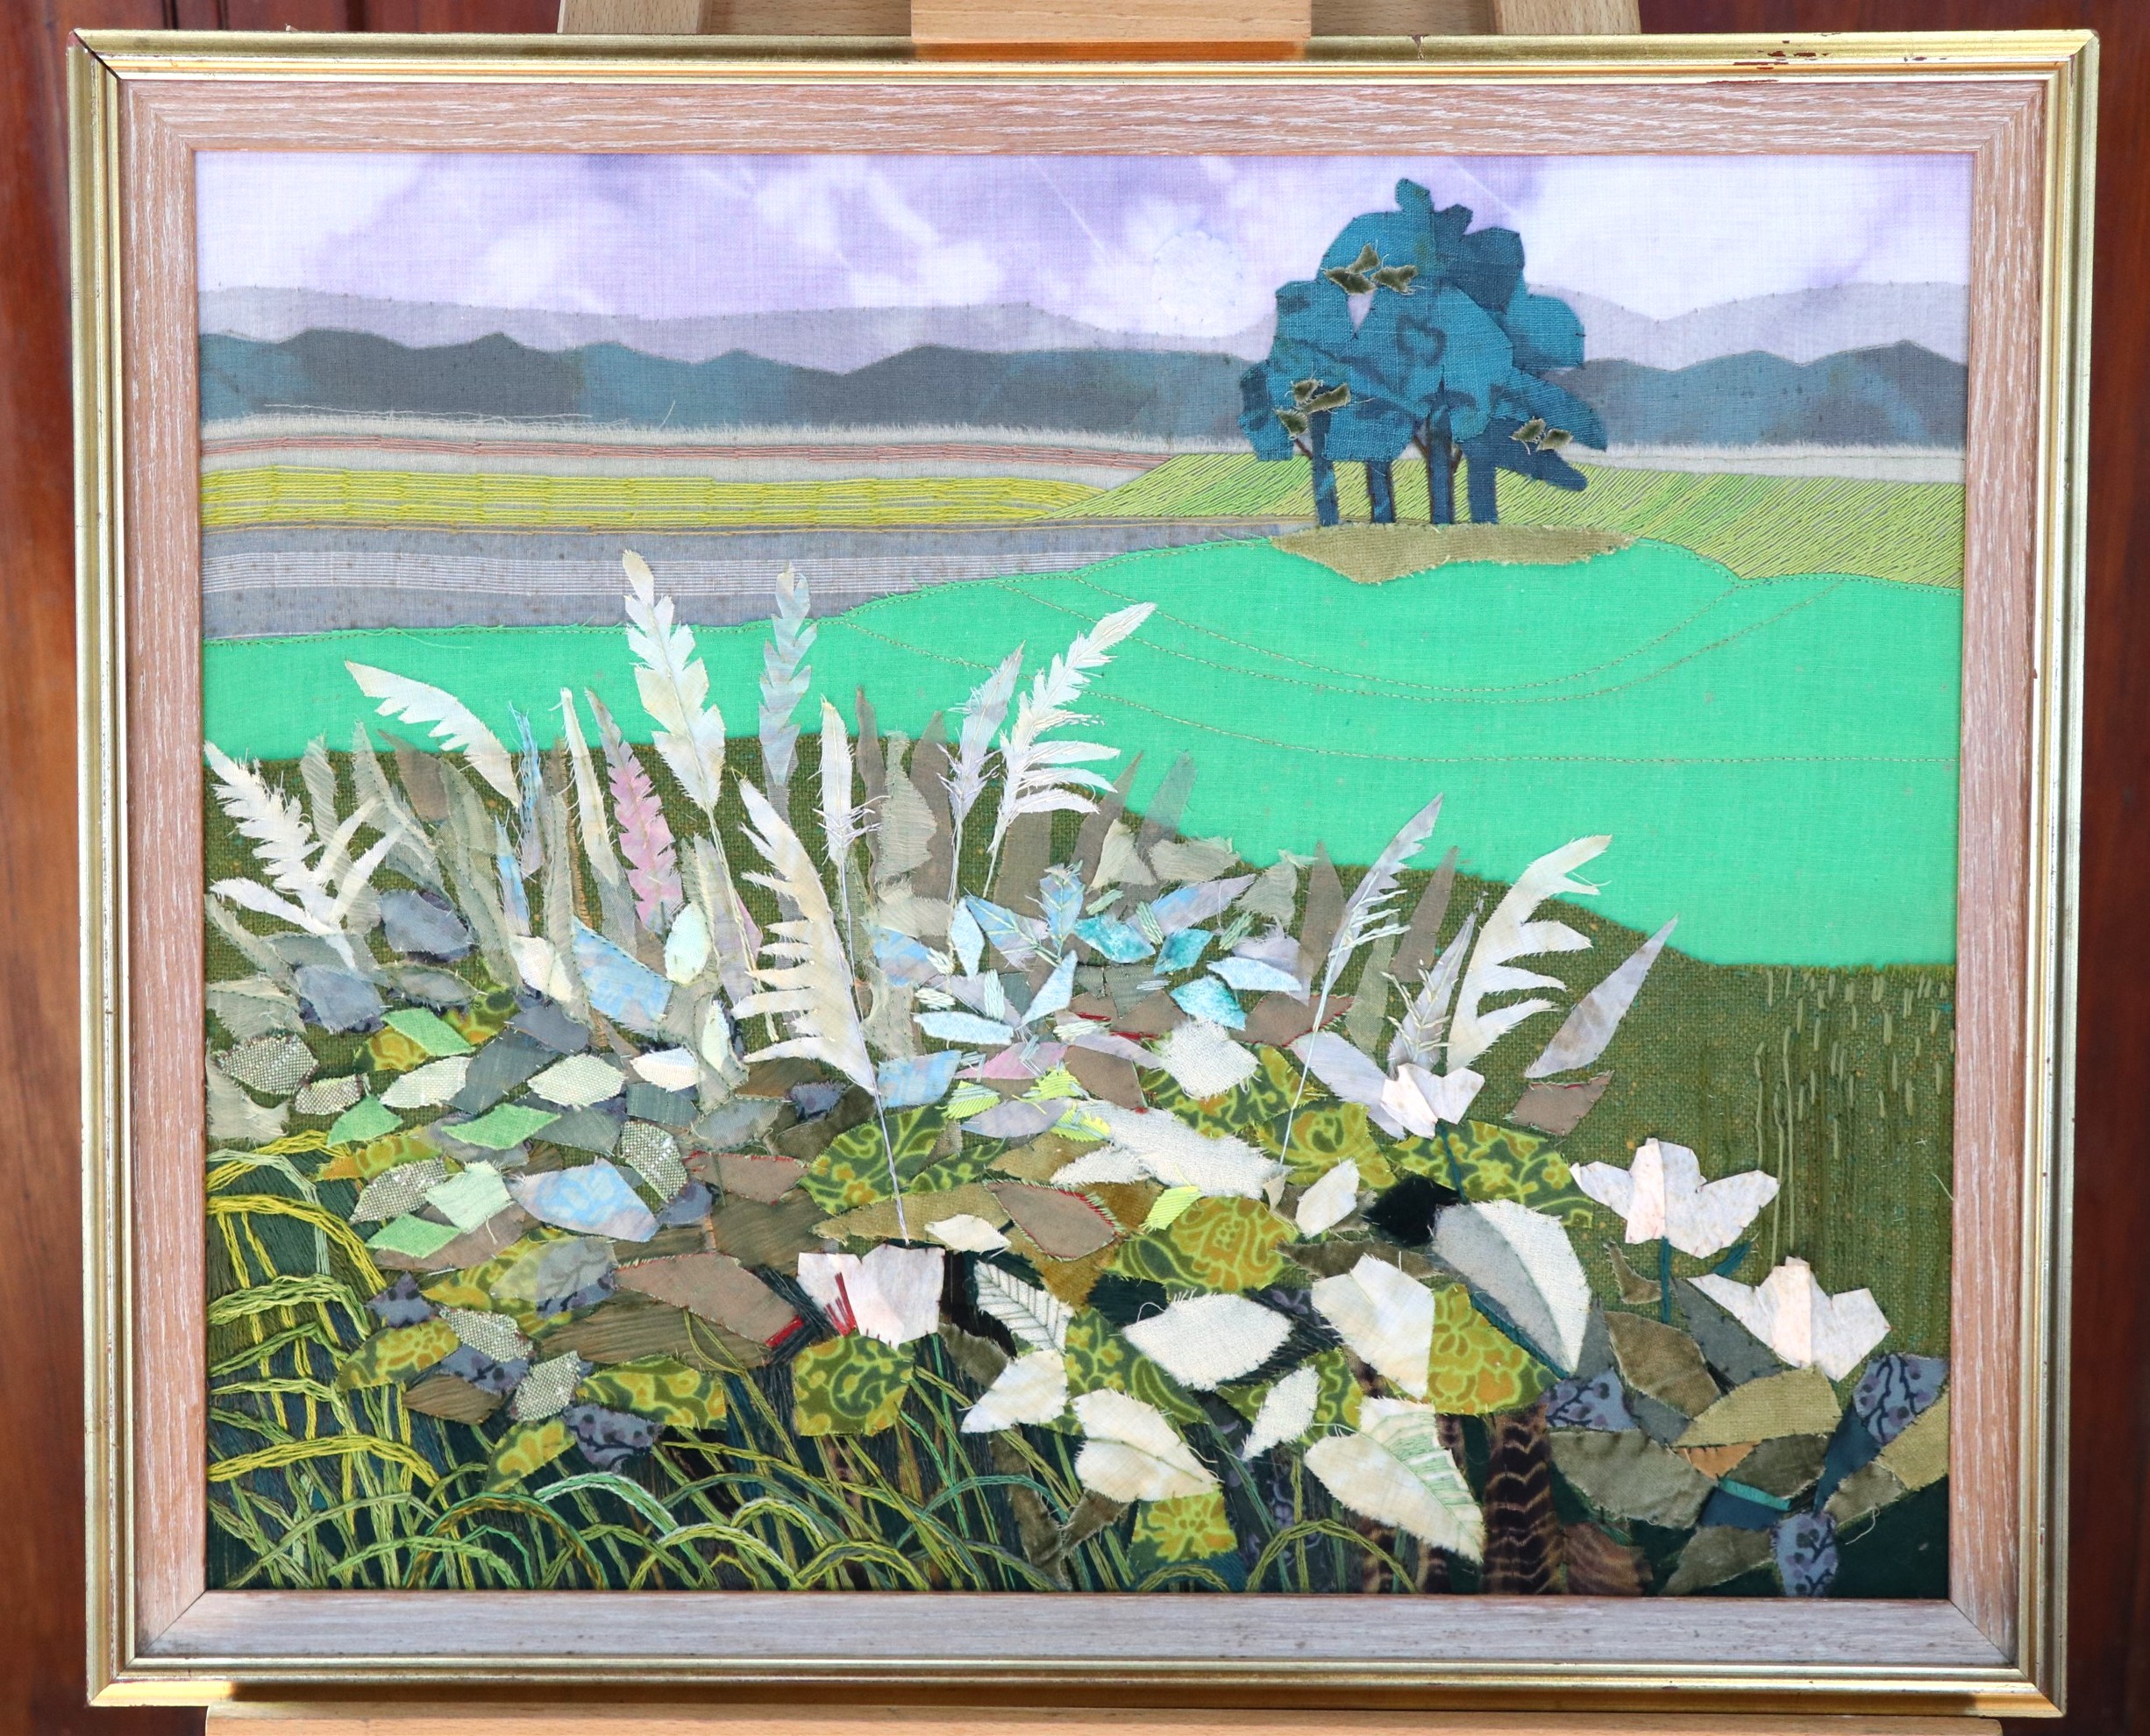 Kirsty McFarlane (Scottish, Contemporary) A pastoral landscape scene with wild flowers before a - Image 2 of 2